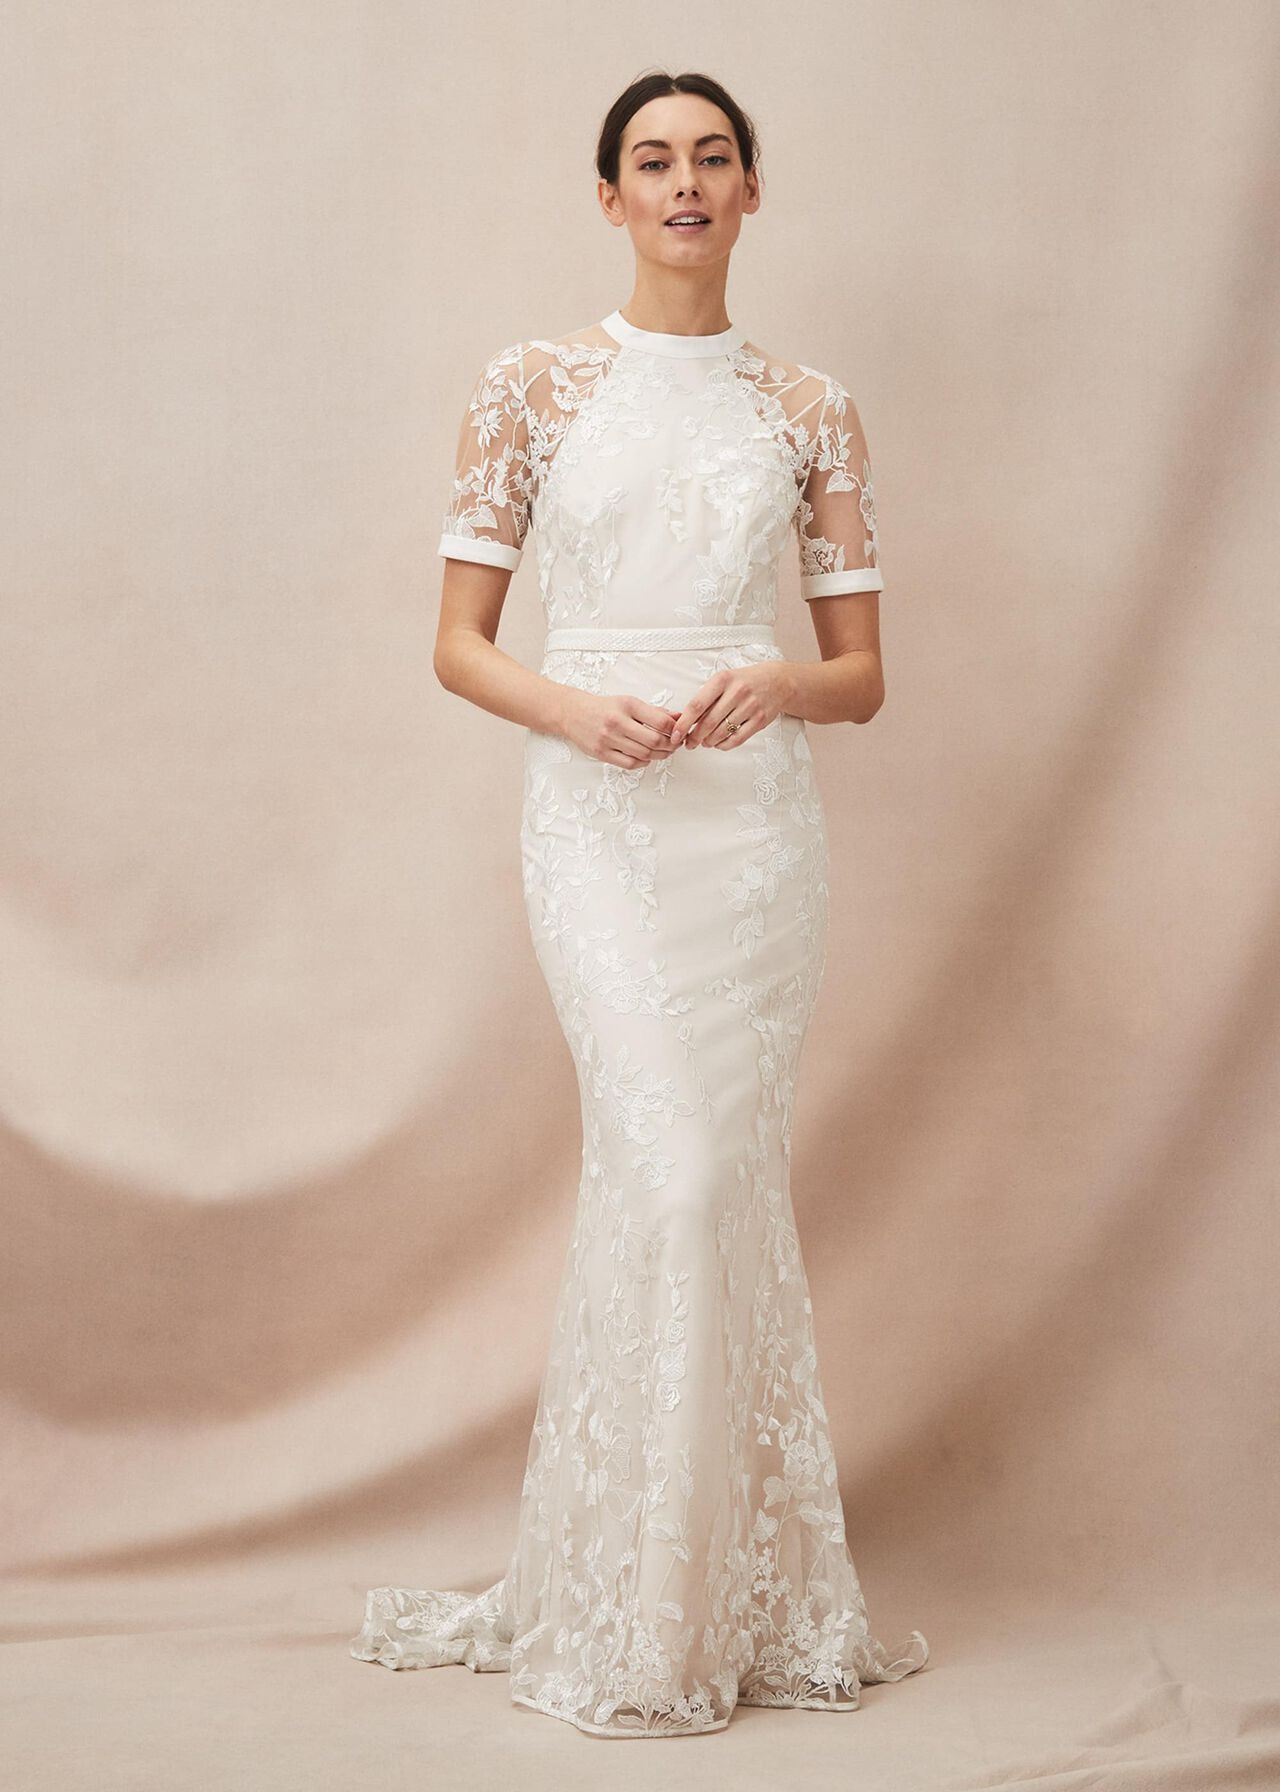 poppy embroidered online wedding dress with fitted skirt and short sheer sleeves